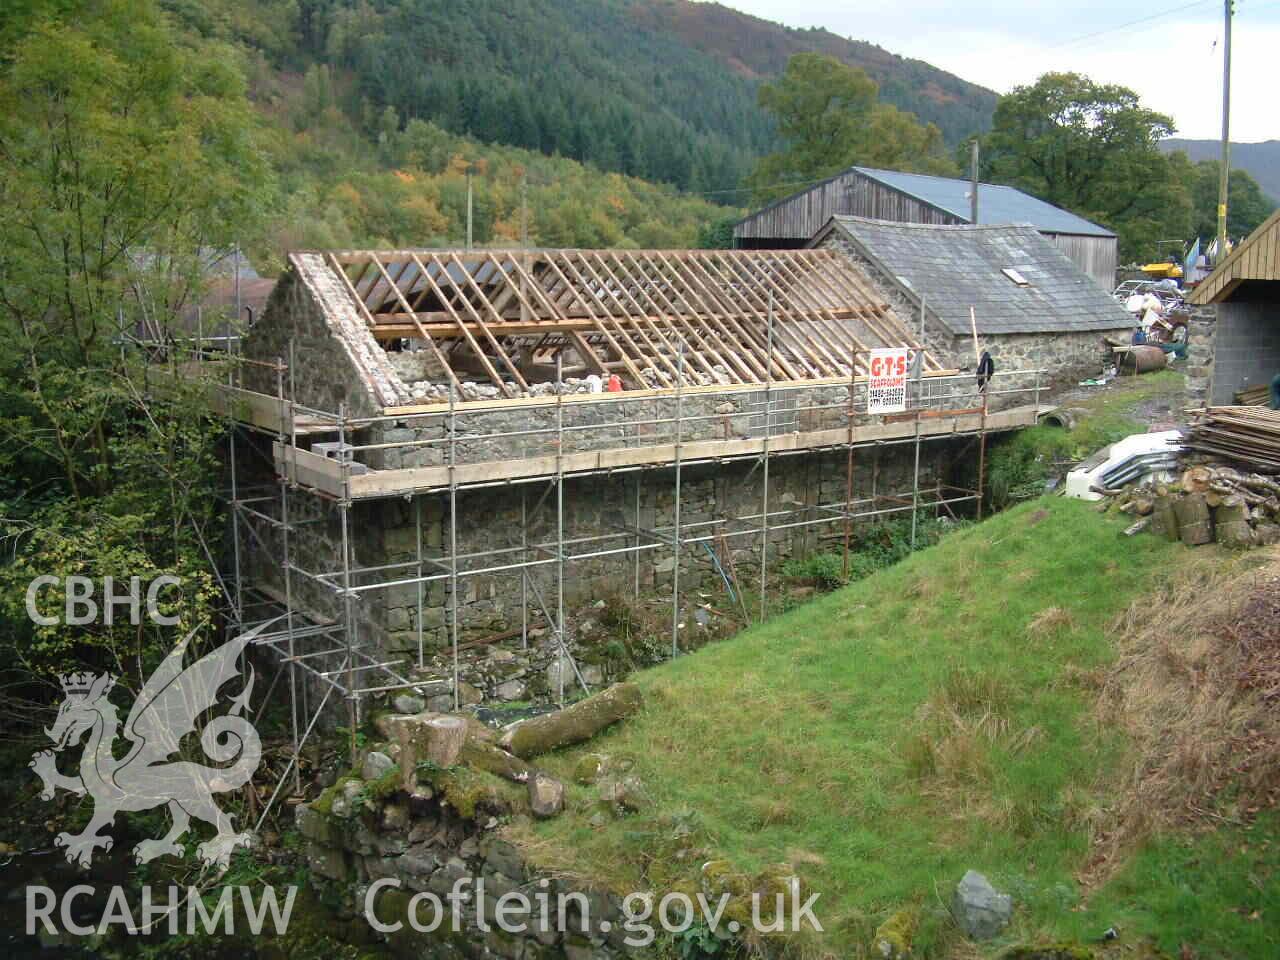 Photograph showing Dolmelynllyn Turning Mill, taken by John Latham, 2003.